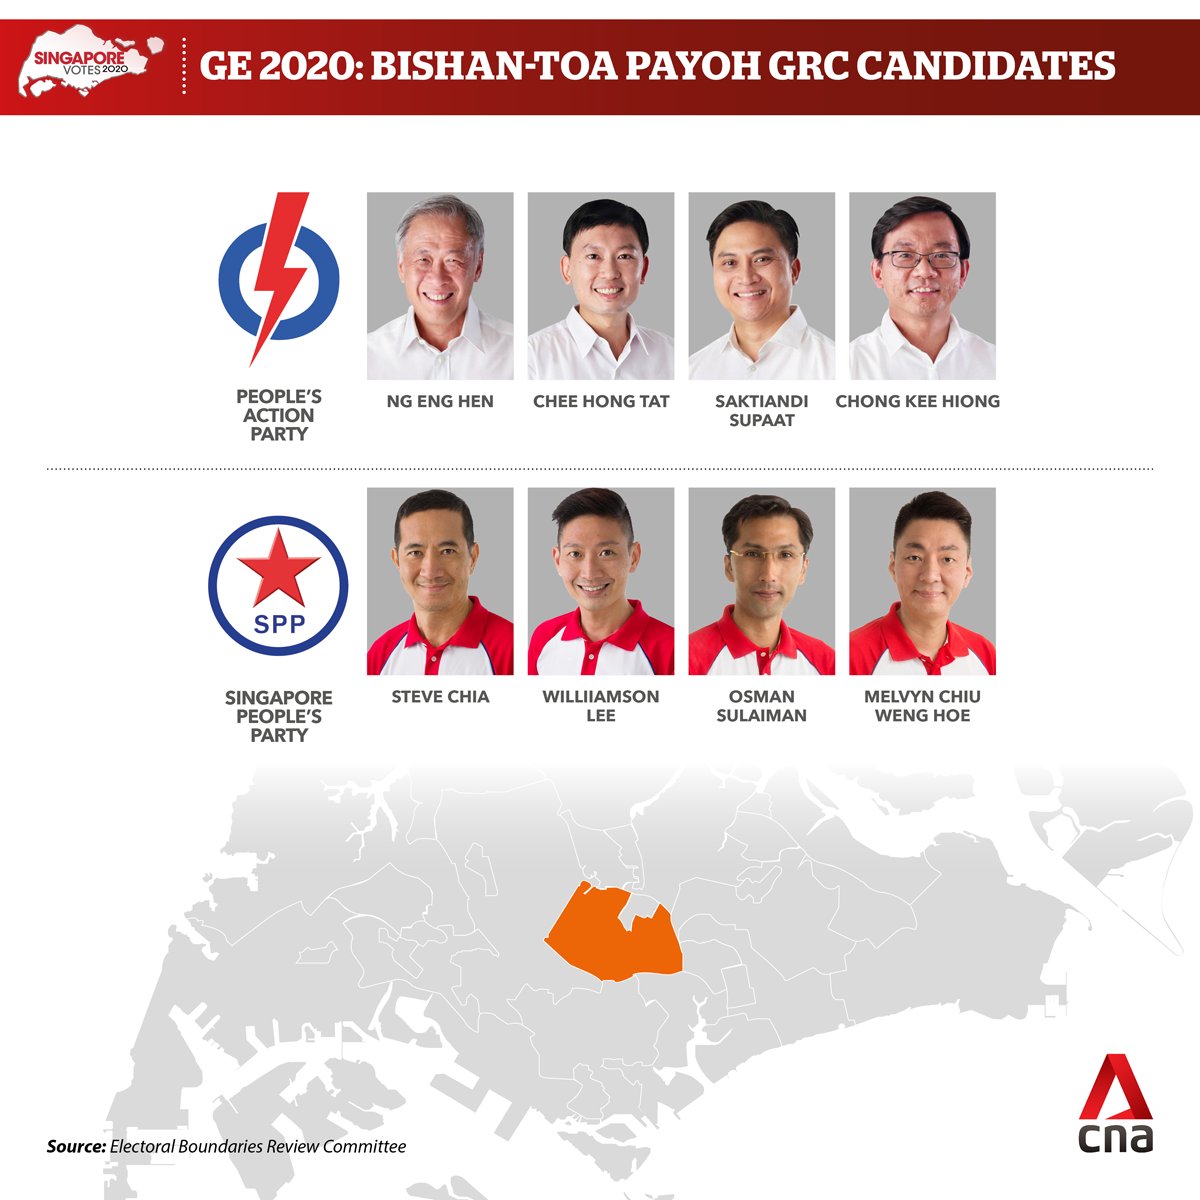  #GE2020  : The Singapore People's Party team taking on the PAP team led by Ng Eng Hen in Bishan-Toa Payoh GRC  https://cna.asia/2YKT53f 